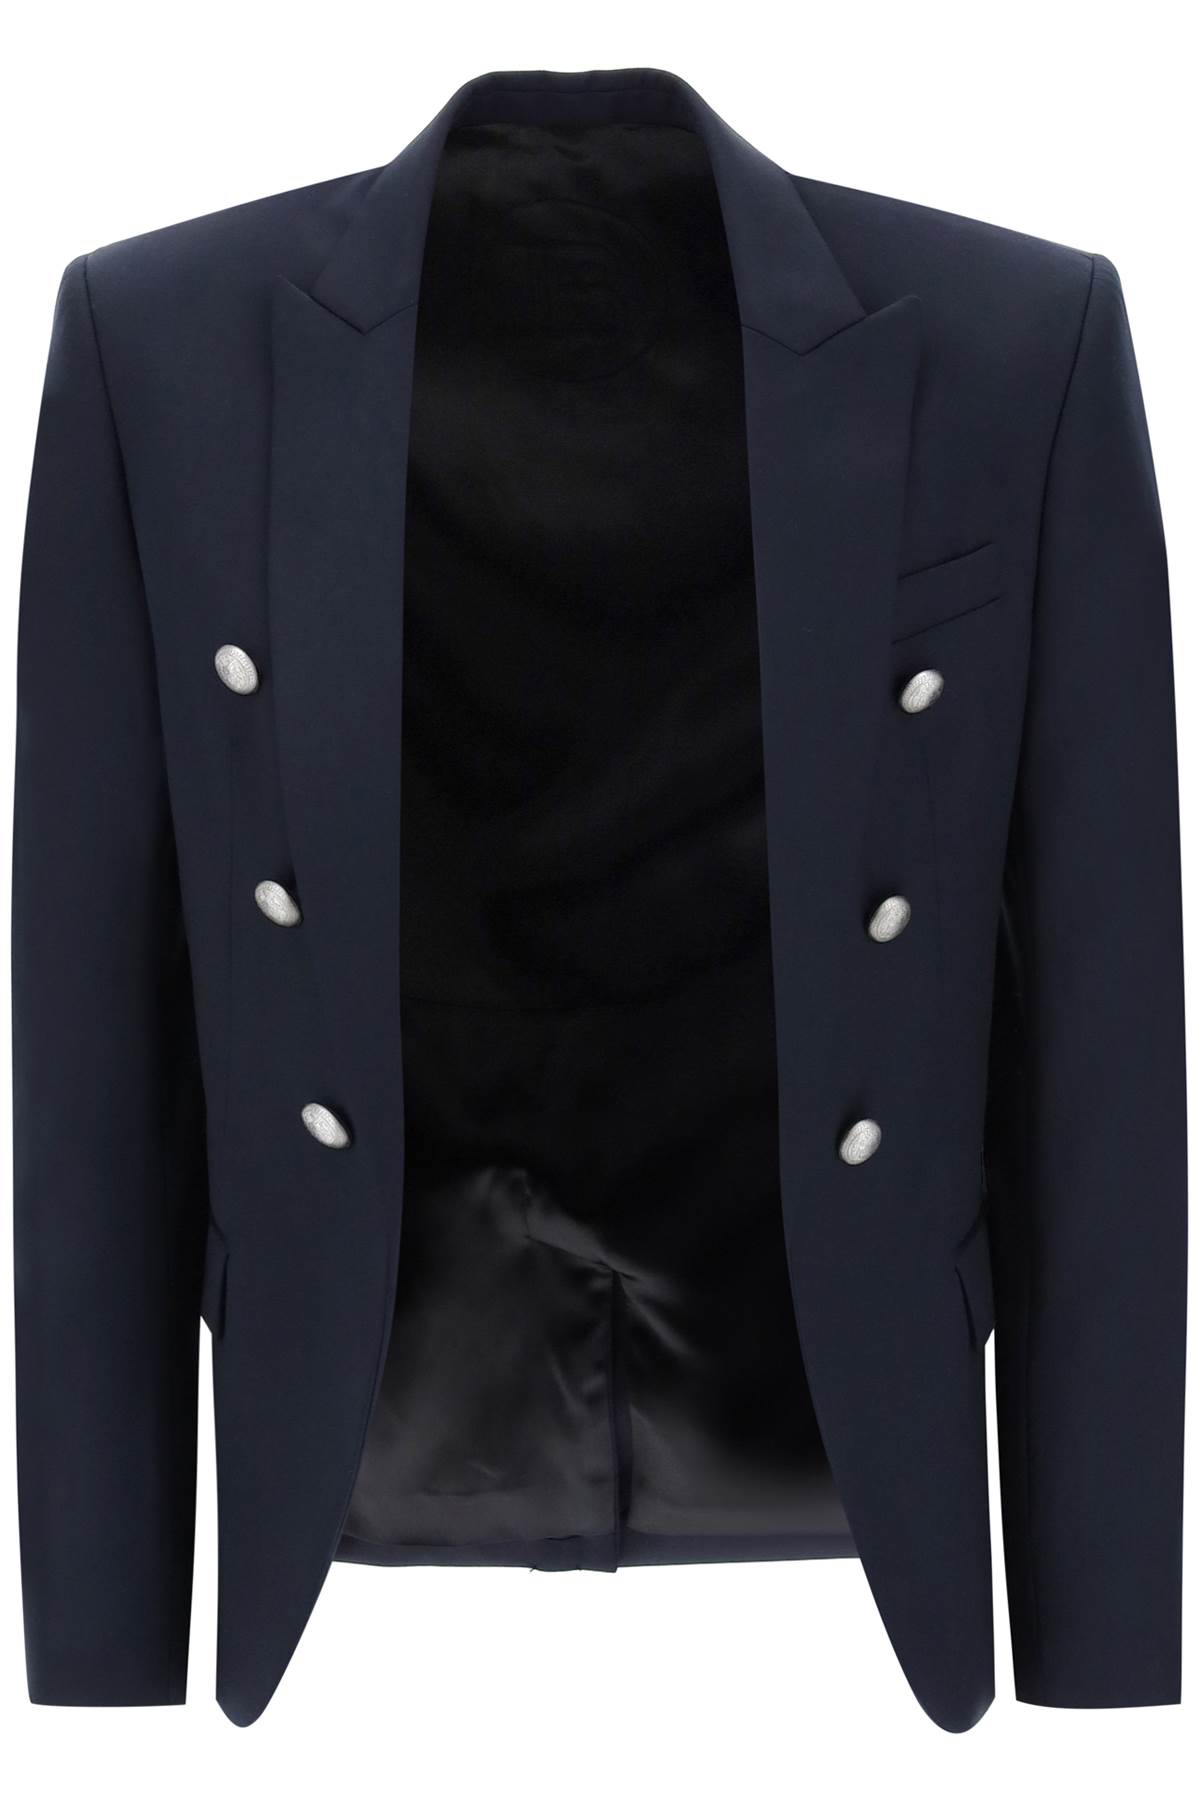 Balmain Wool Jacket With Ornamental Buttons